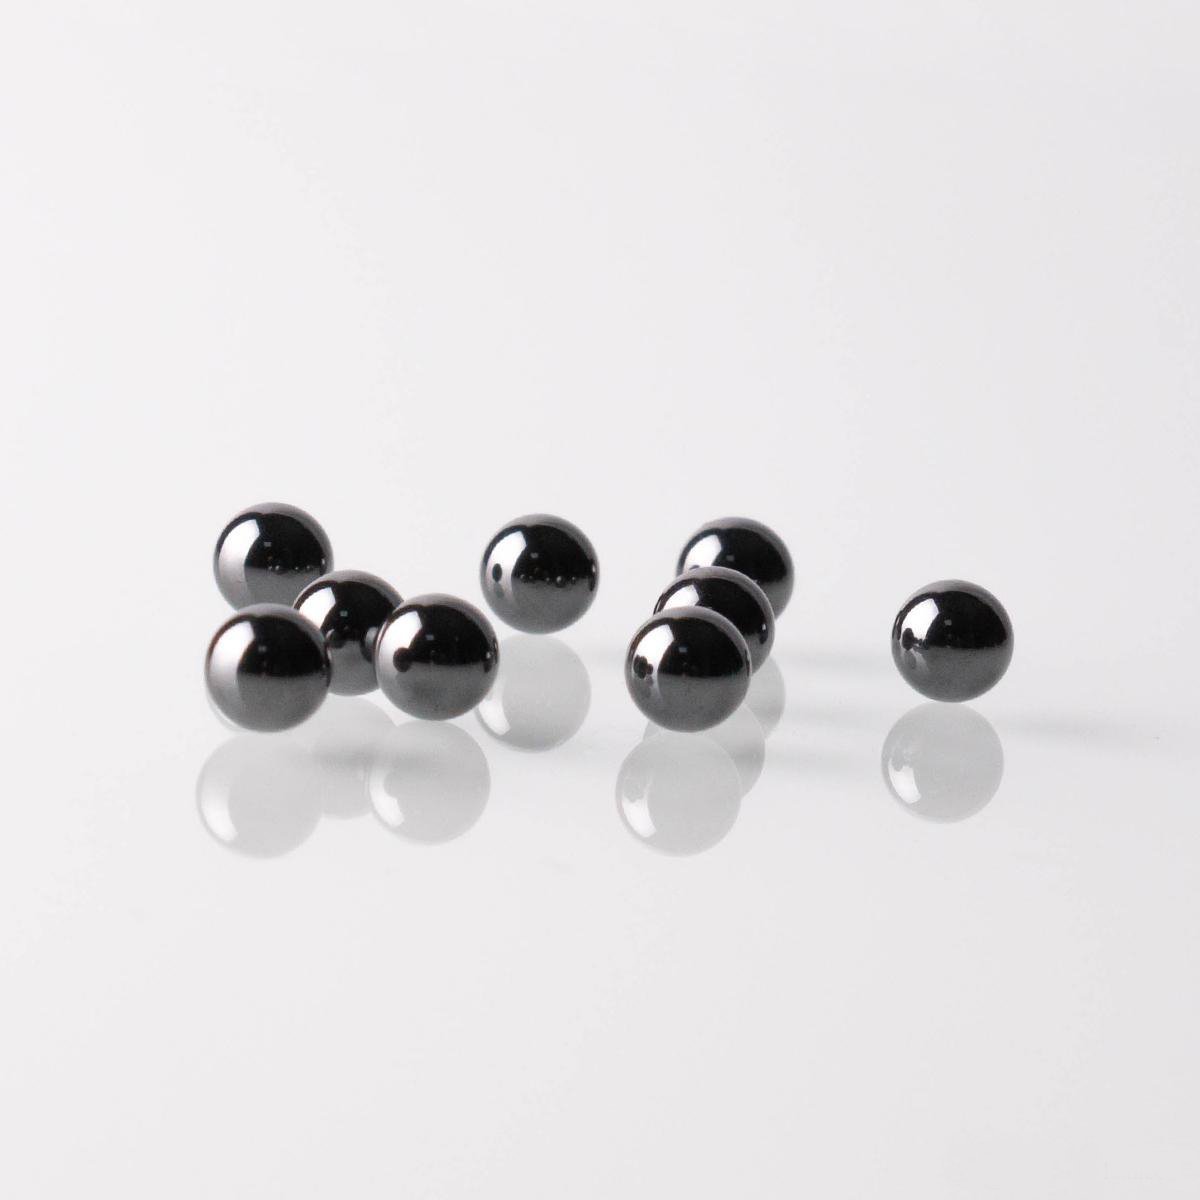 Terp Pearls - Silicon Carbide - Glassworks710